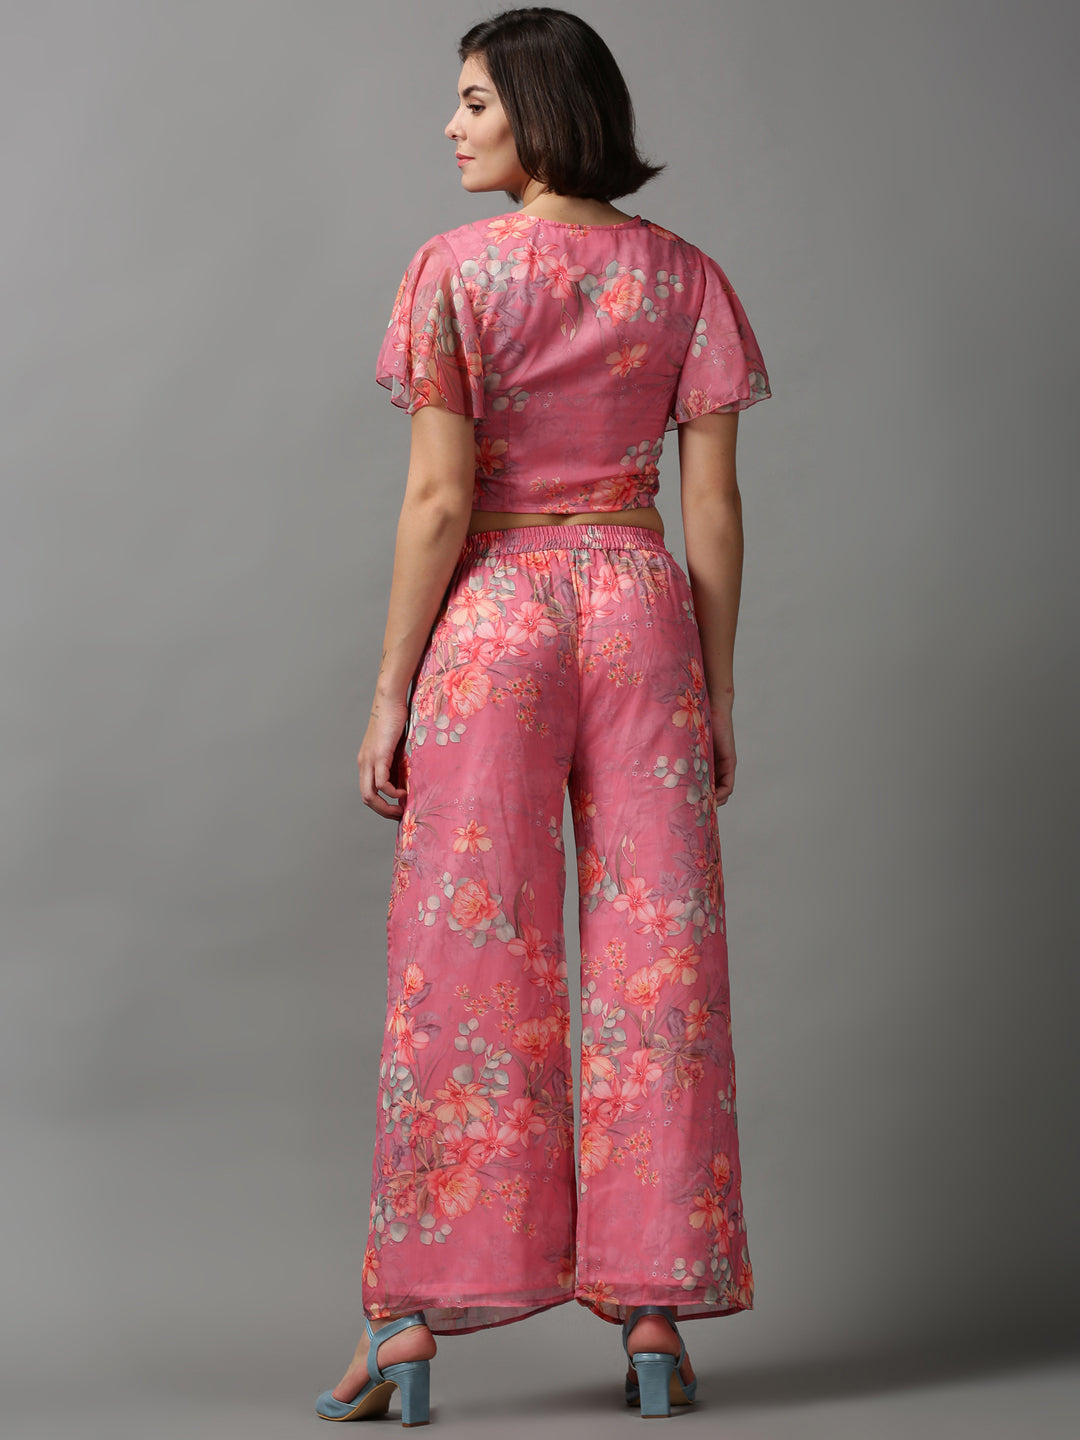 Women's Pink Printed Co-ords